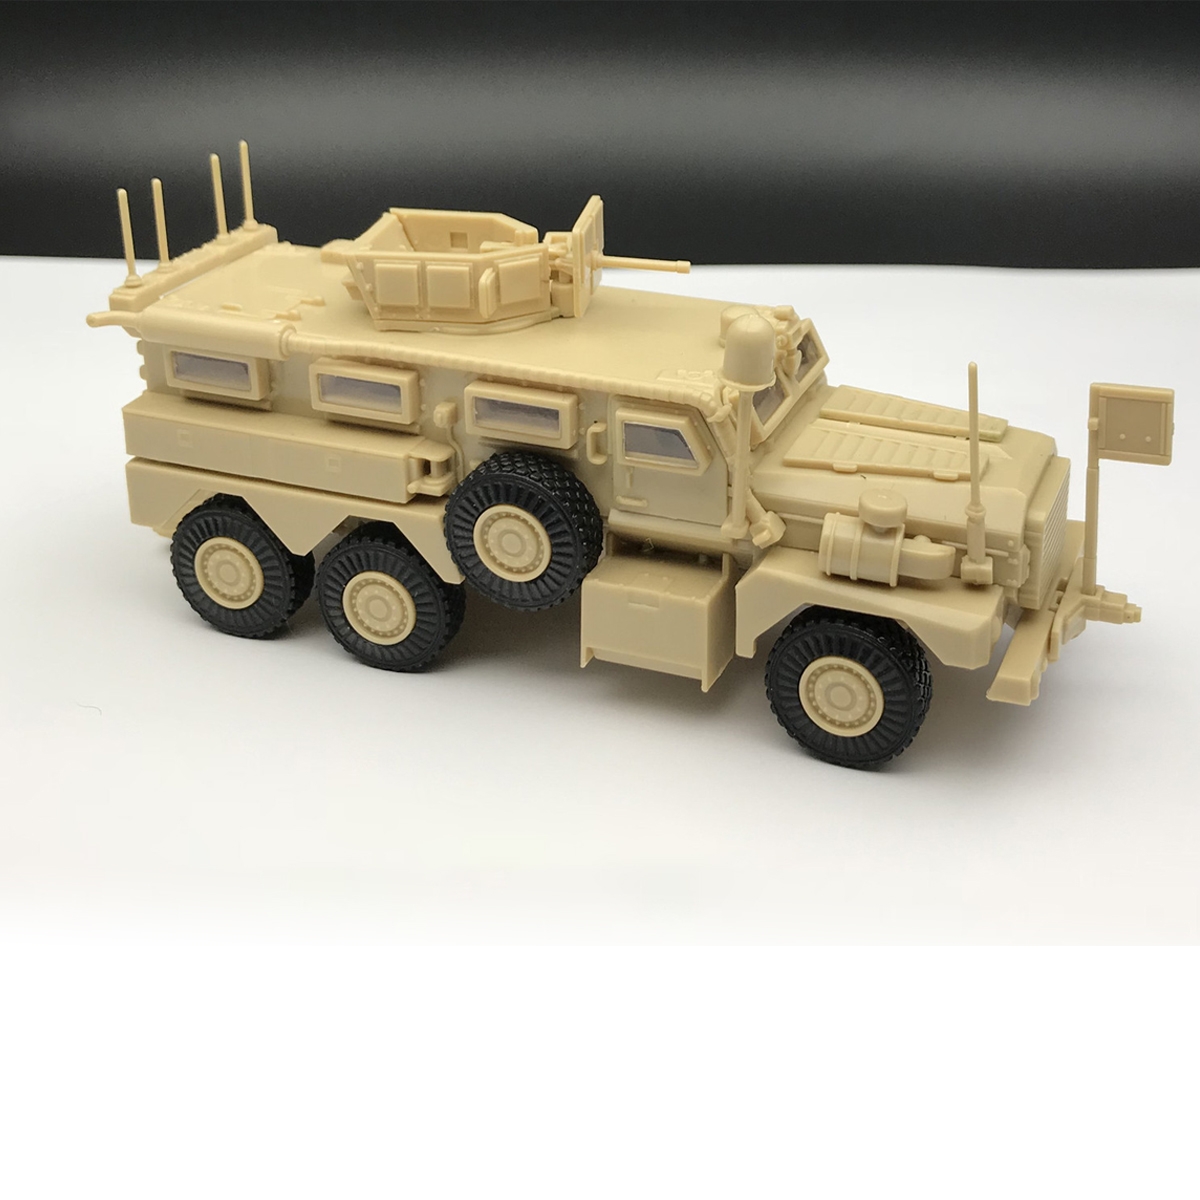 1/72 US Army Cougar American Modern 6x6 Mrap Vehicle Military Plastic Model Toys